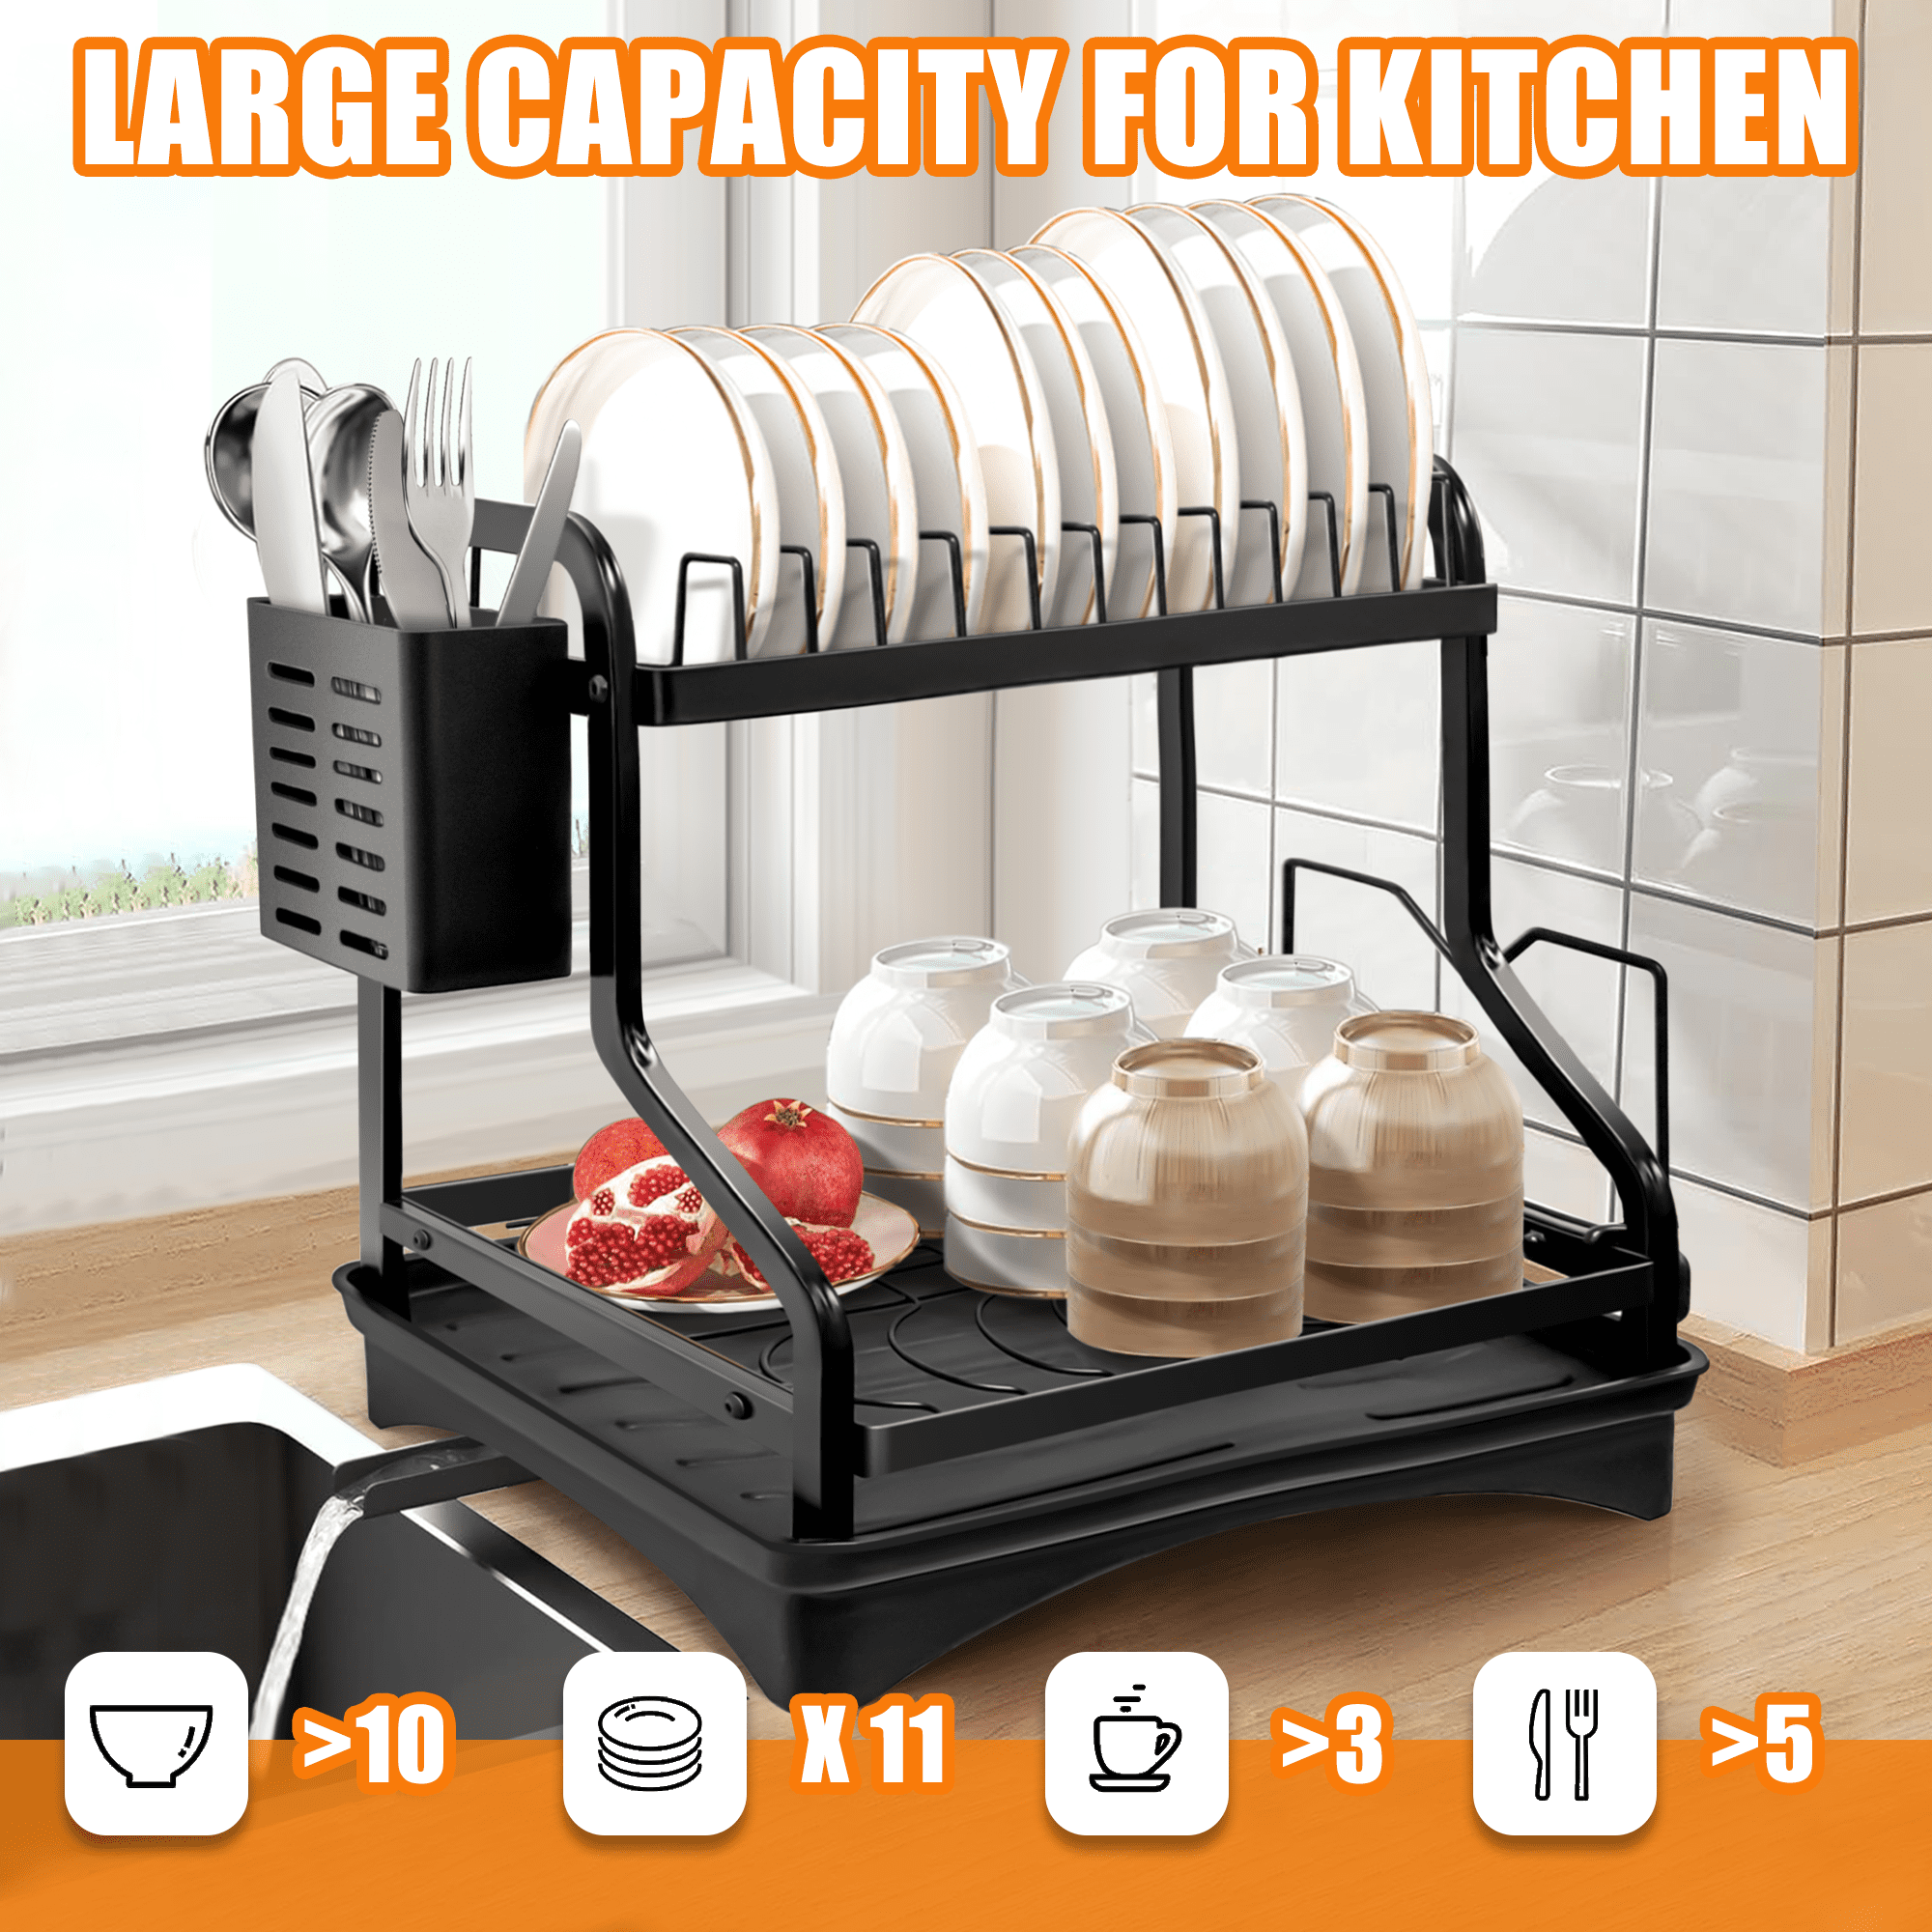 Riousery 2-Tier Dish Rack for Kitchen, Dish Drying Rack with Drain Board Tray, Compact Dishing Rack with Utensil Holder, Cutting Board Holder, Kitchen